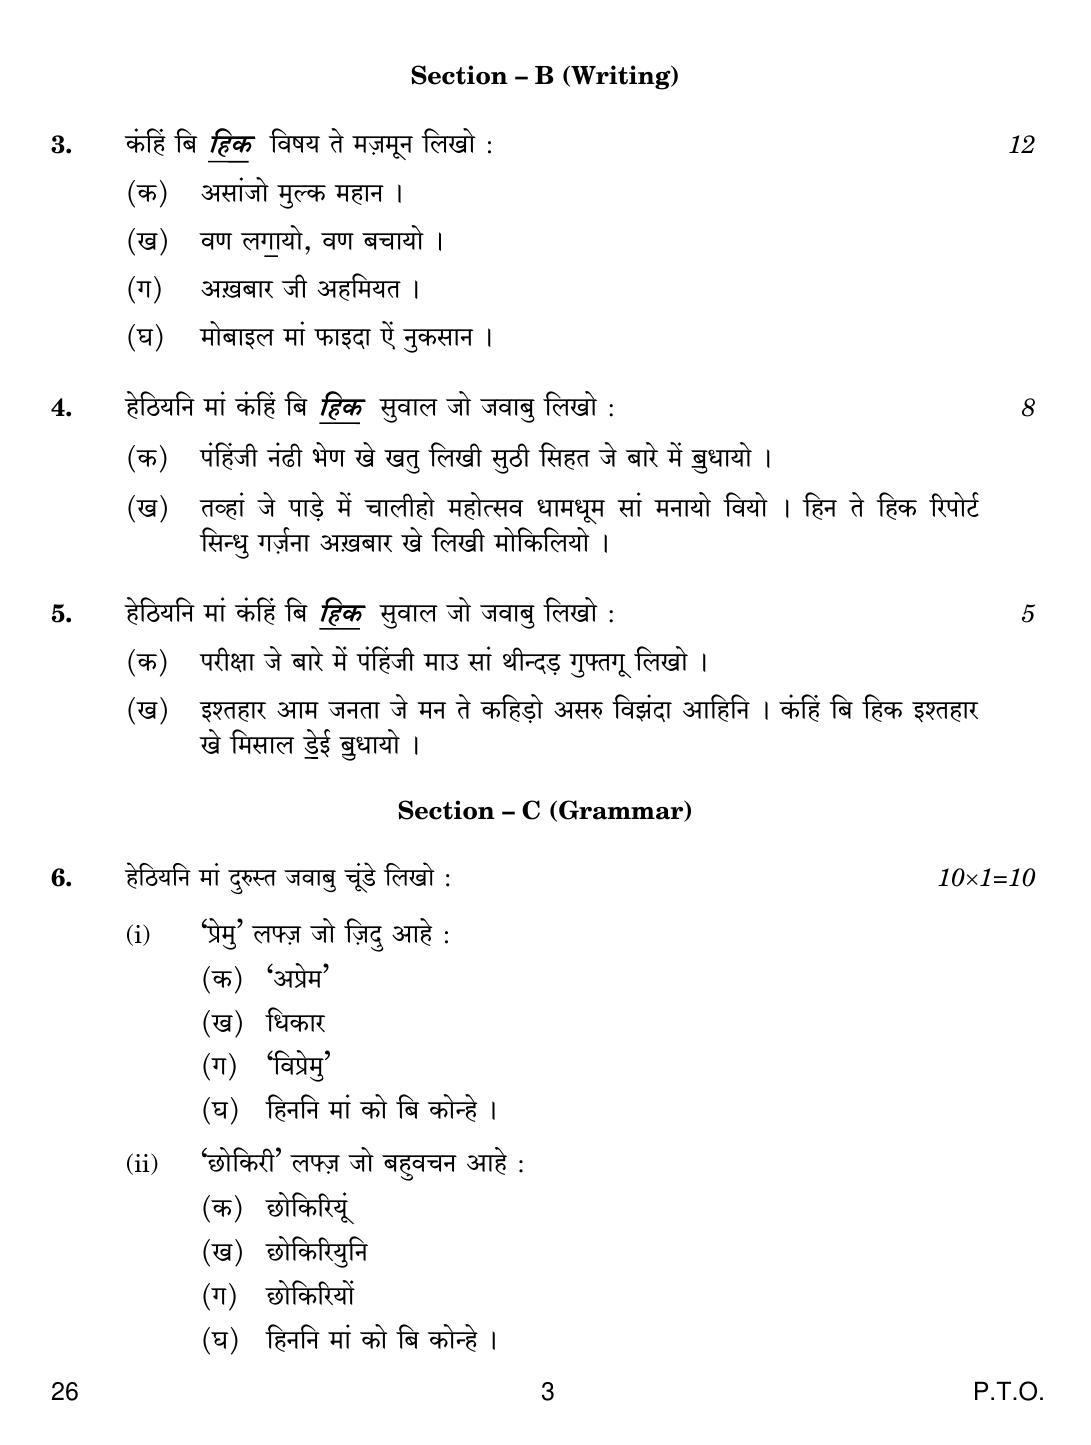 CBSE Class 10 26 SINDHI 2019 Question Paper - Page 3